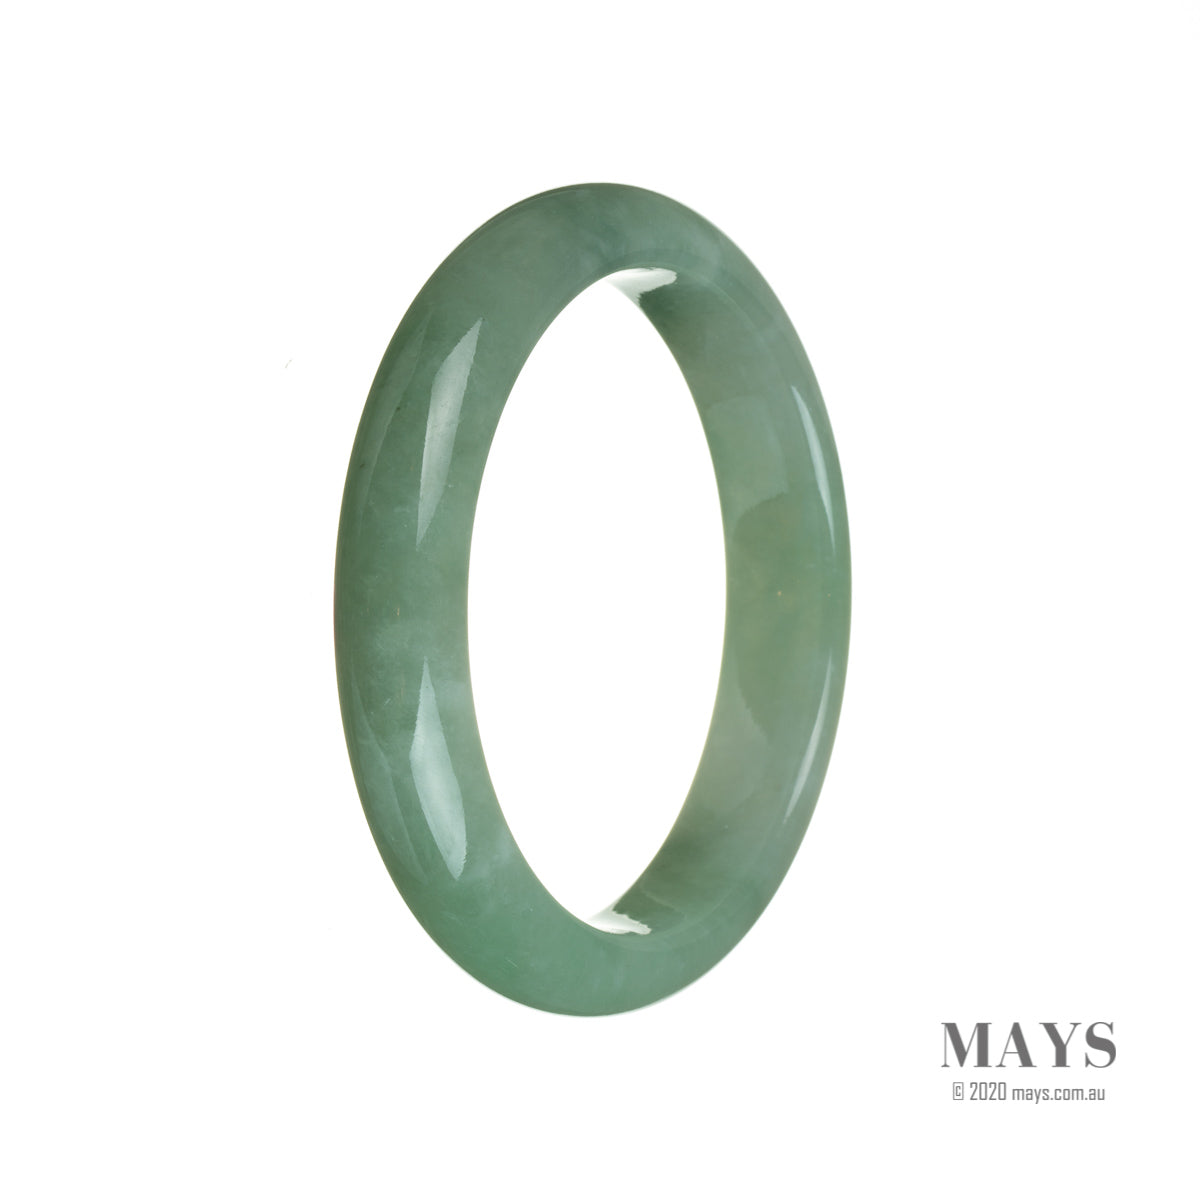 A close-up shot of a stunning green jade bracelet with smooth, semi-round beads, measuring 59mm in size. The bracelet is made from genuine Grade A Burmese jade and is beautifully crafted by MAYS GEMS.